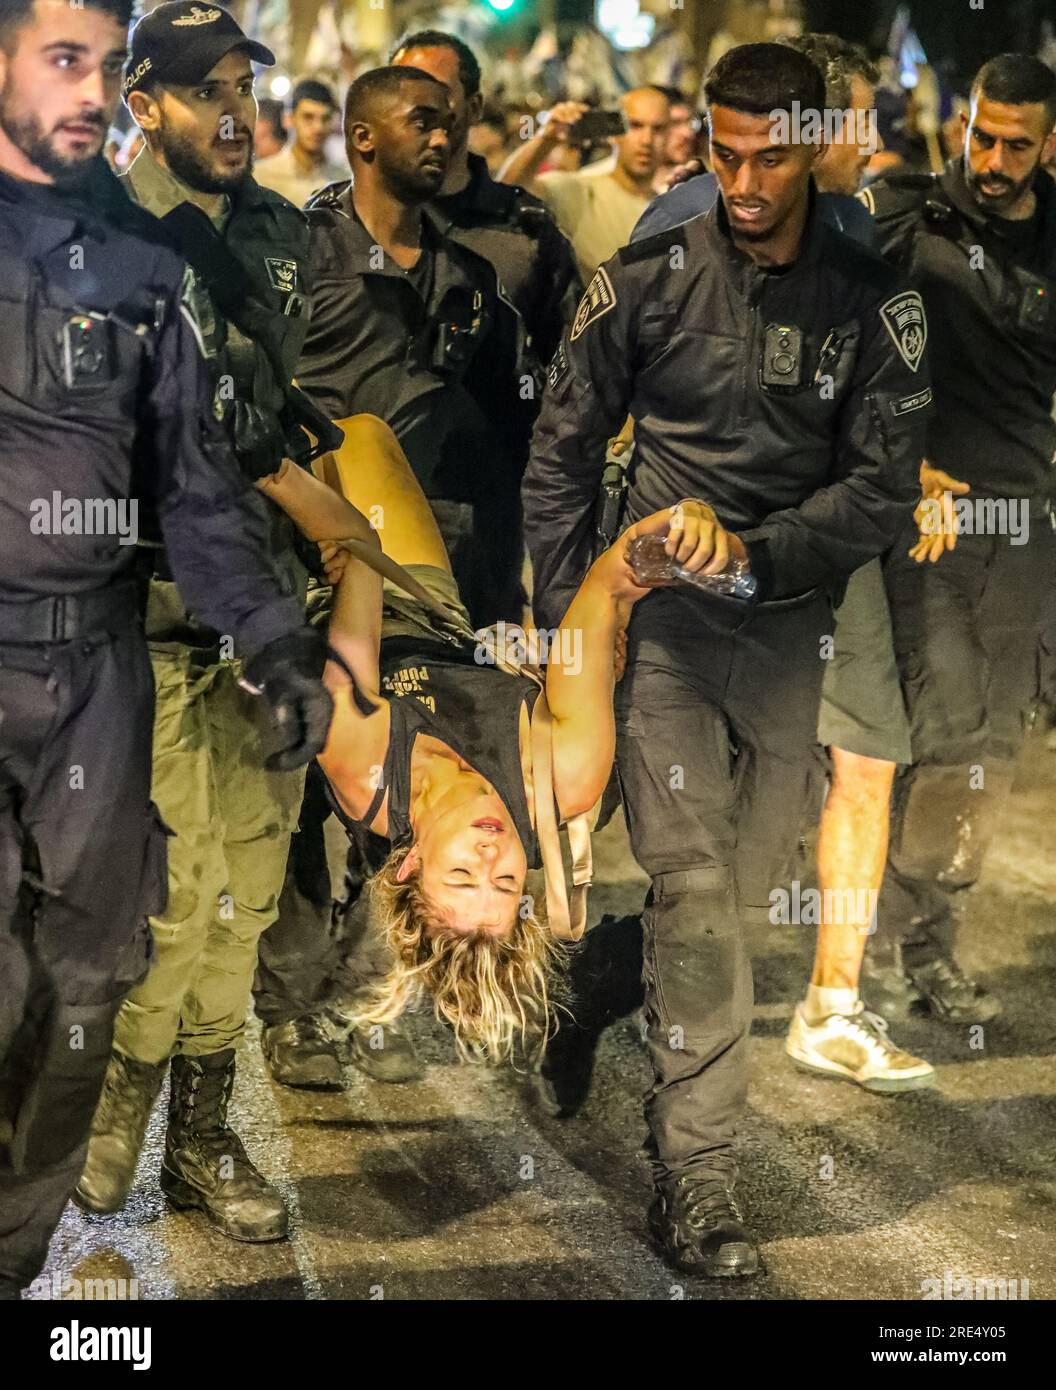 Jerusalem, Israel. 24th July 2023.  Police officers are carrying  a woman protester, taking her into custody   Credit: Yoram Biberman/Alamy Live News. Stock Photo